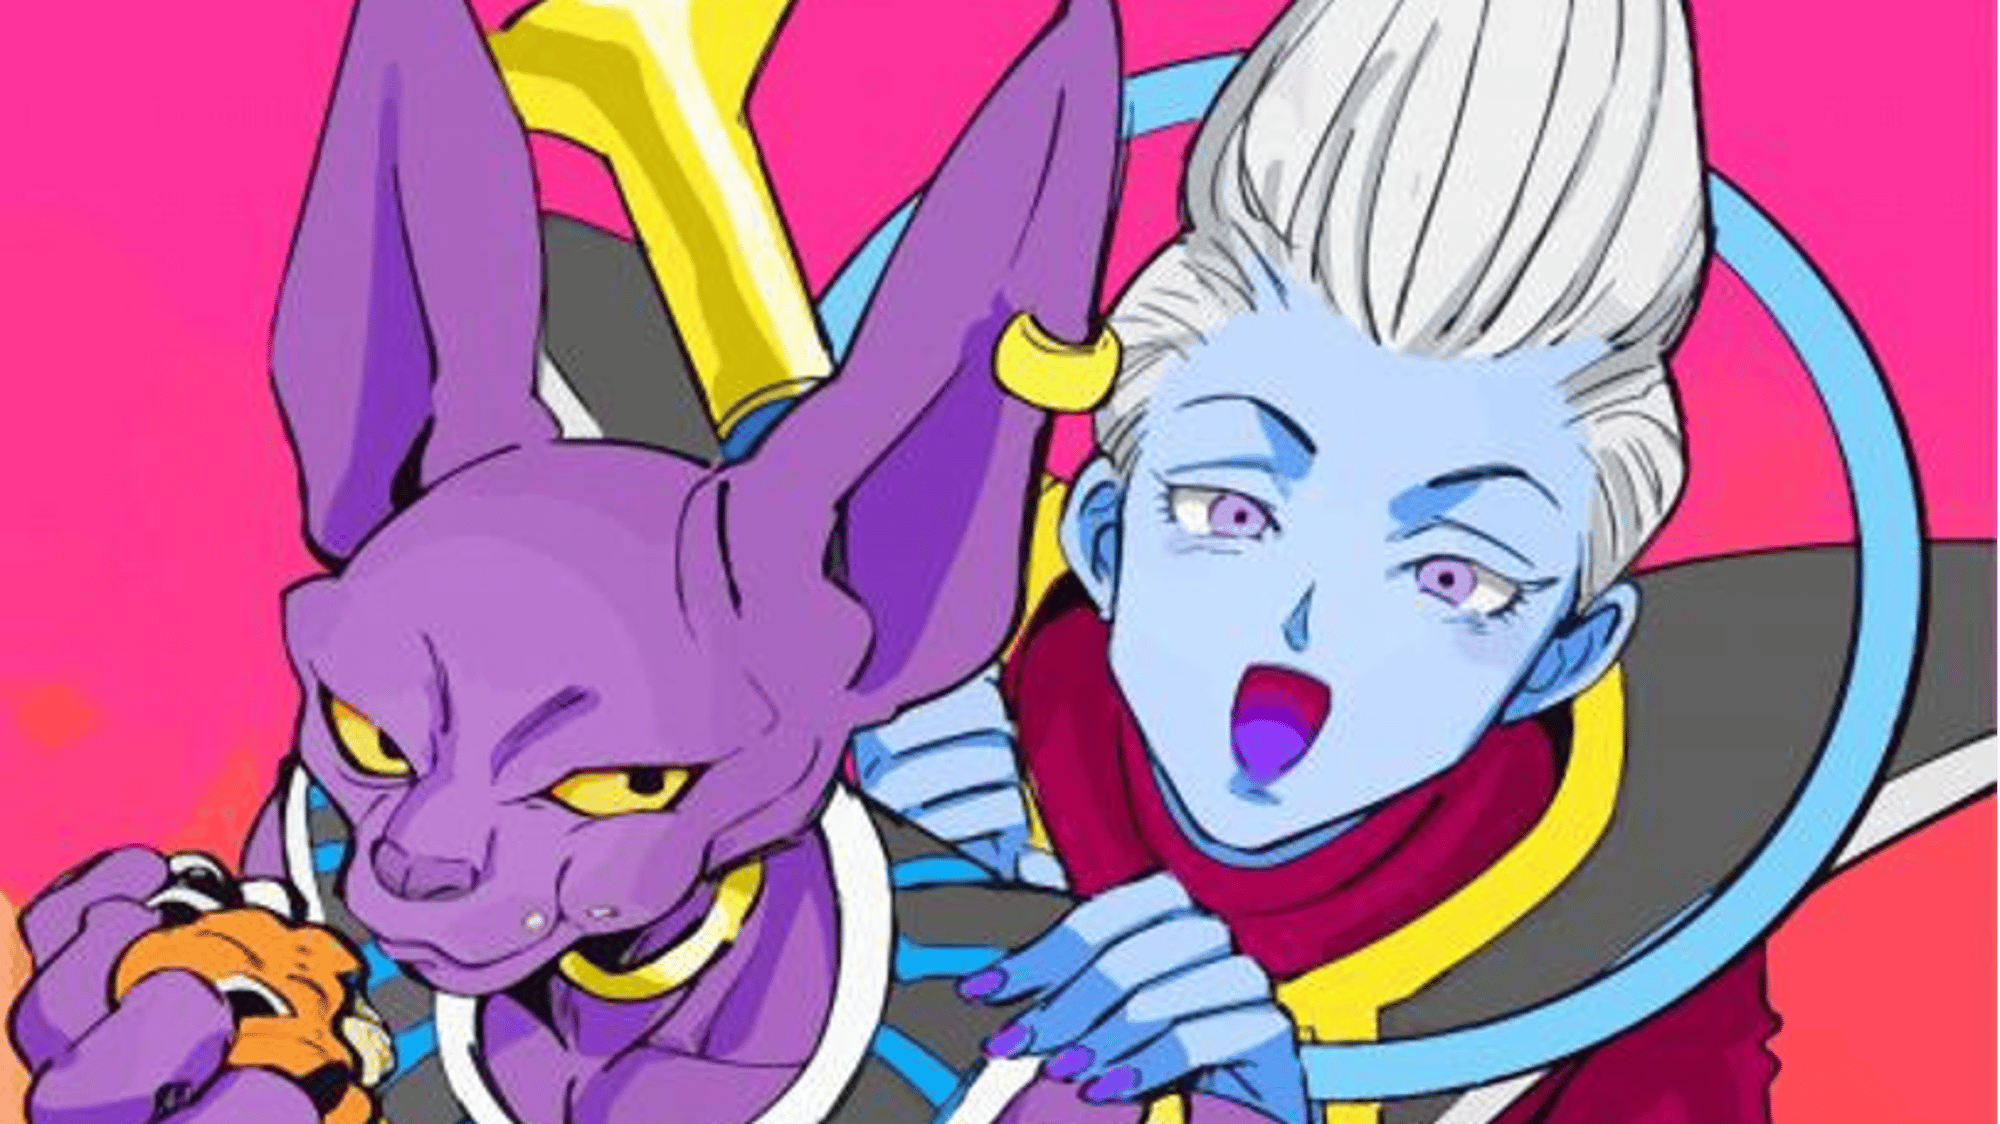 Whis and Beerus.